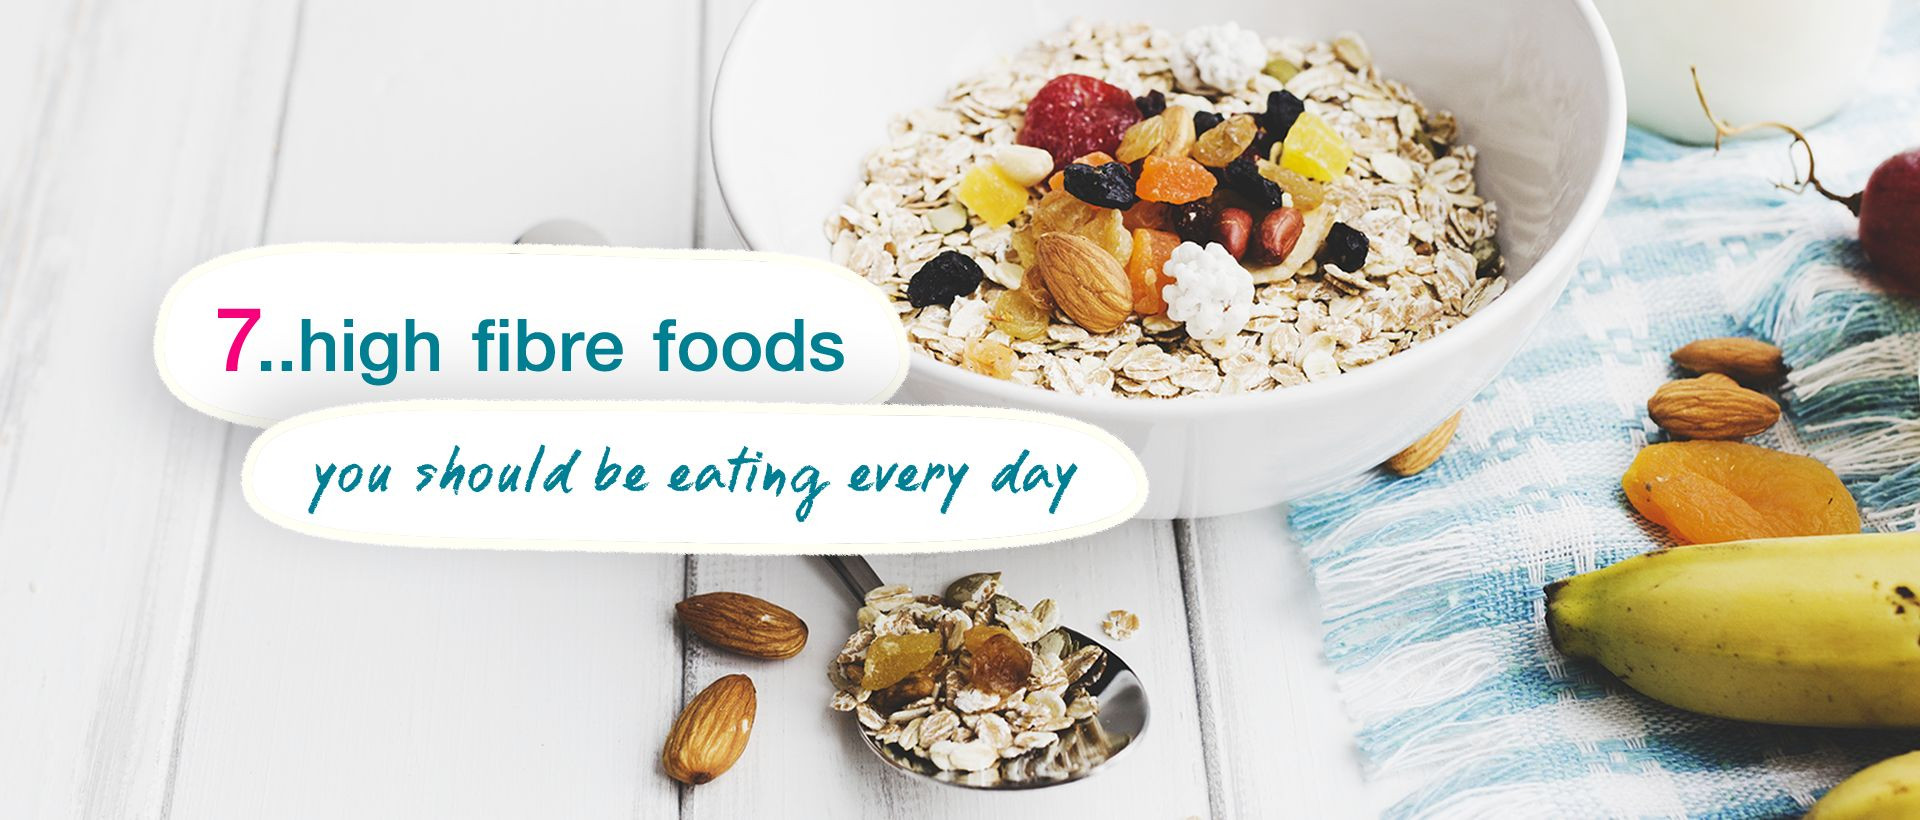 7 high fibre foods you should be eating every day